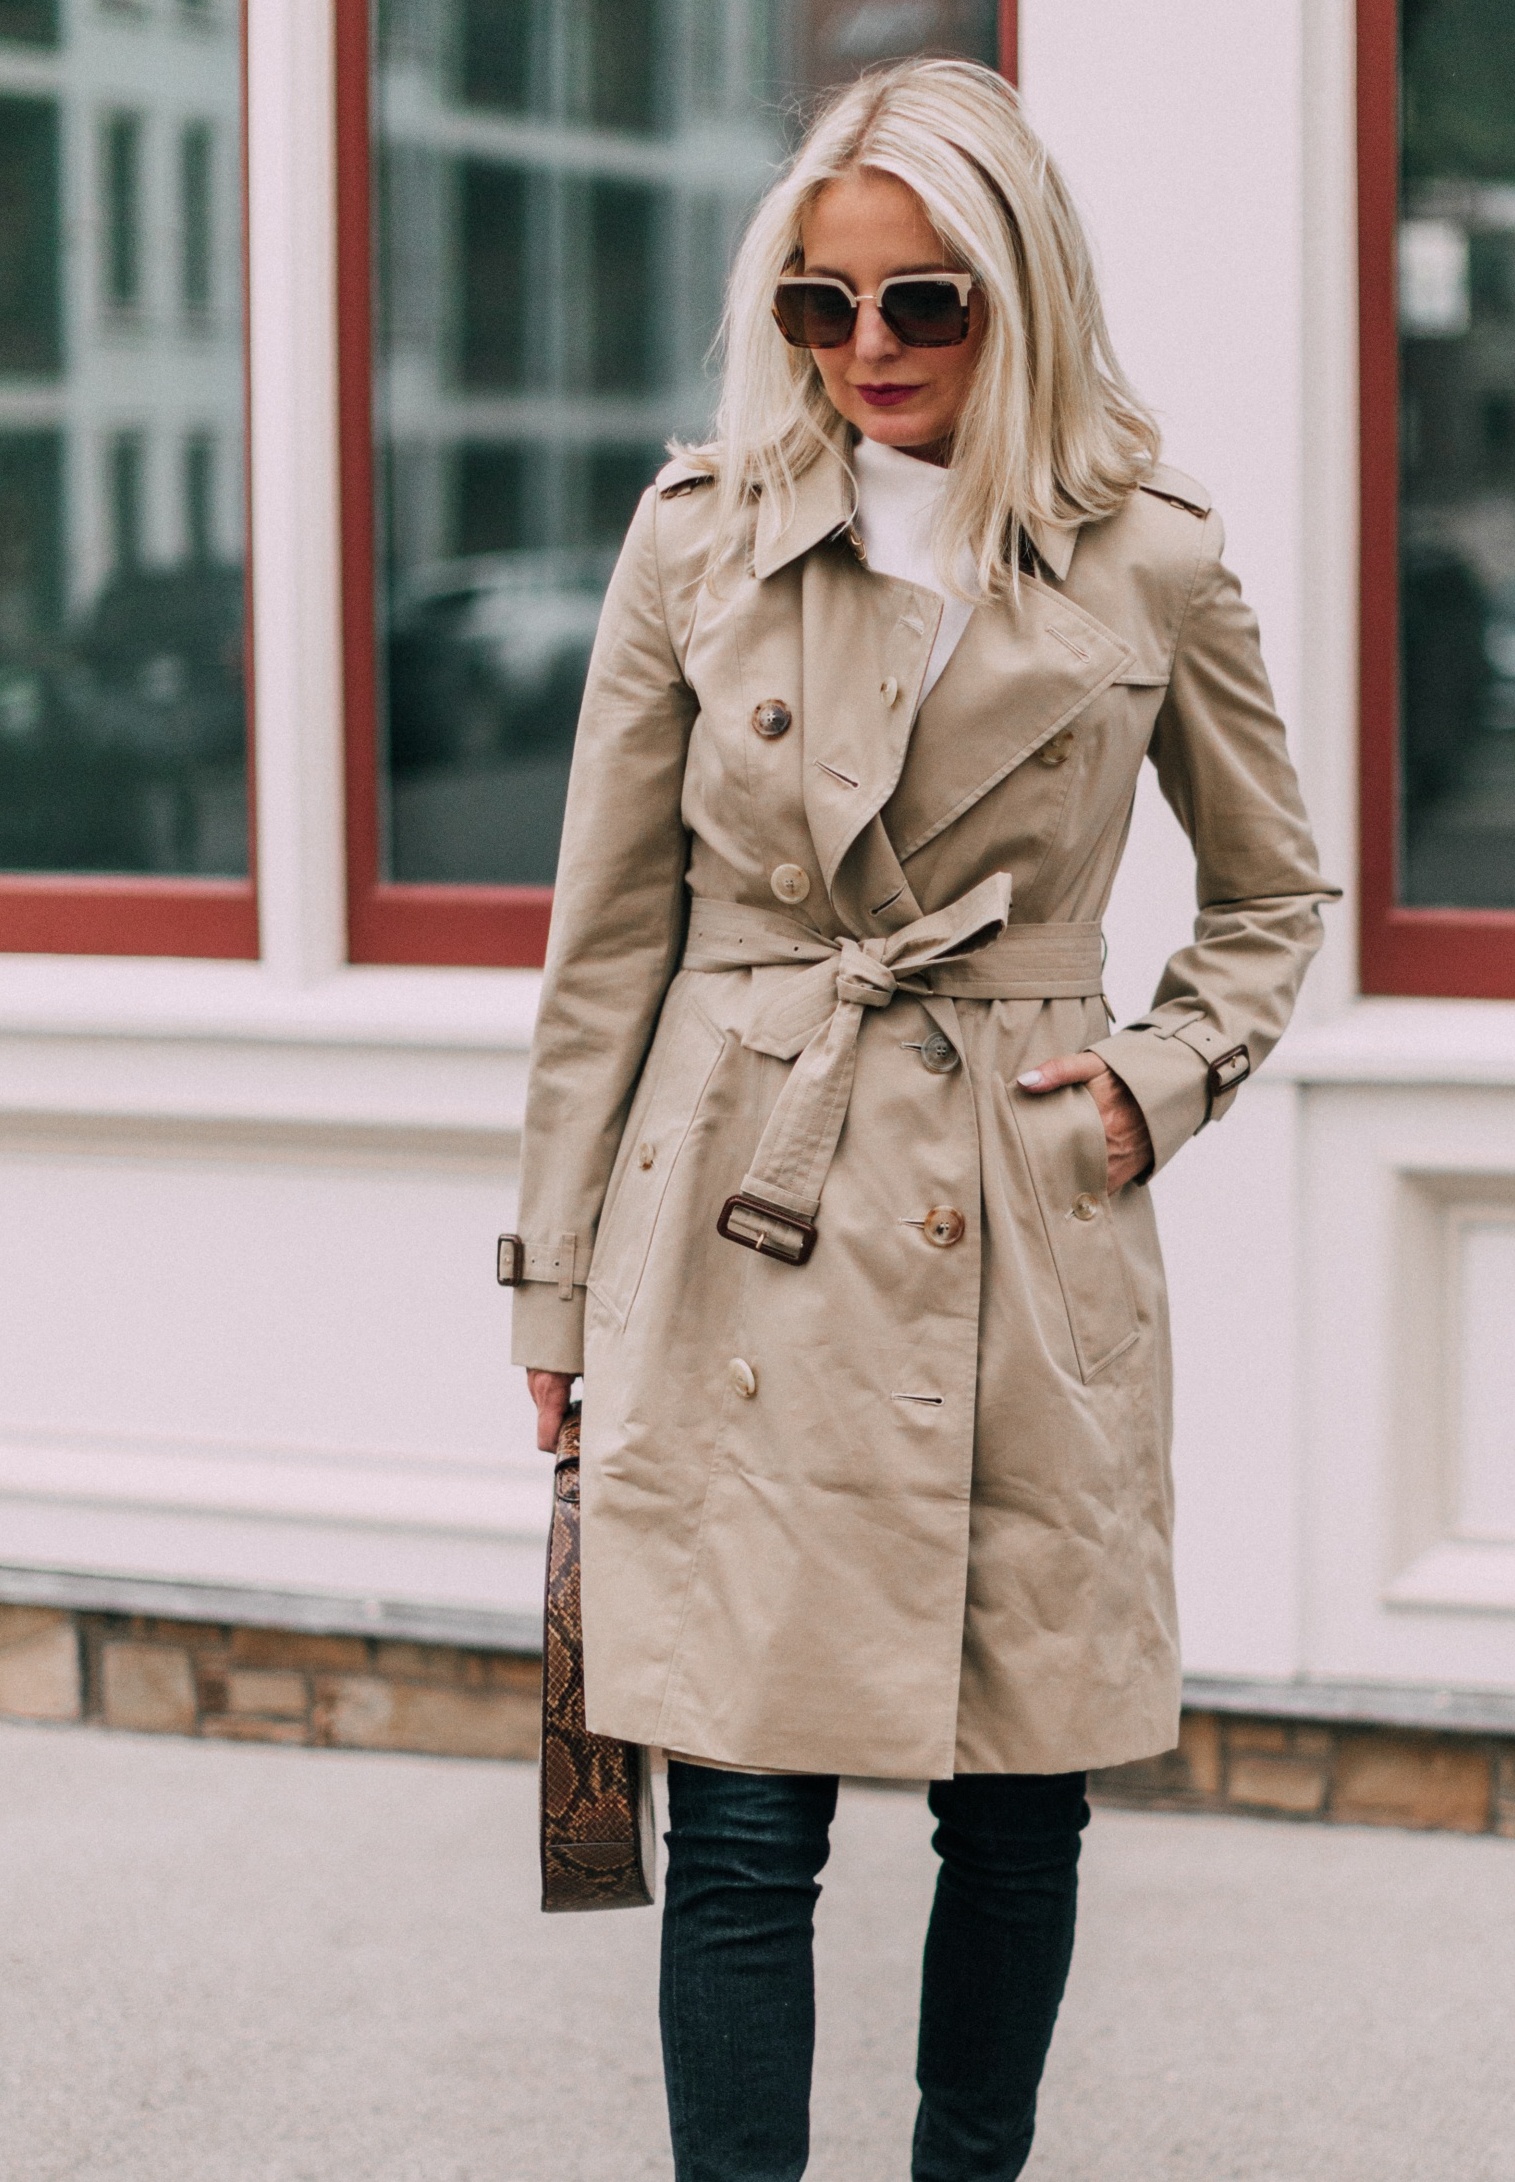 burberry chelsea heritage slim fit trench coat in honey color, reviewing iconic burberry trench coat